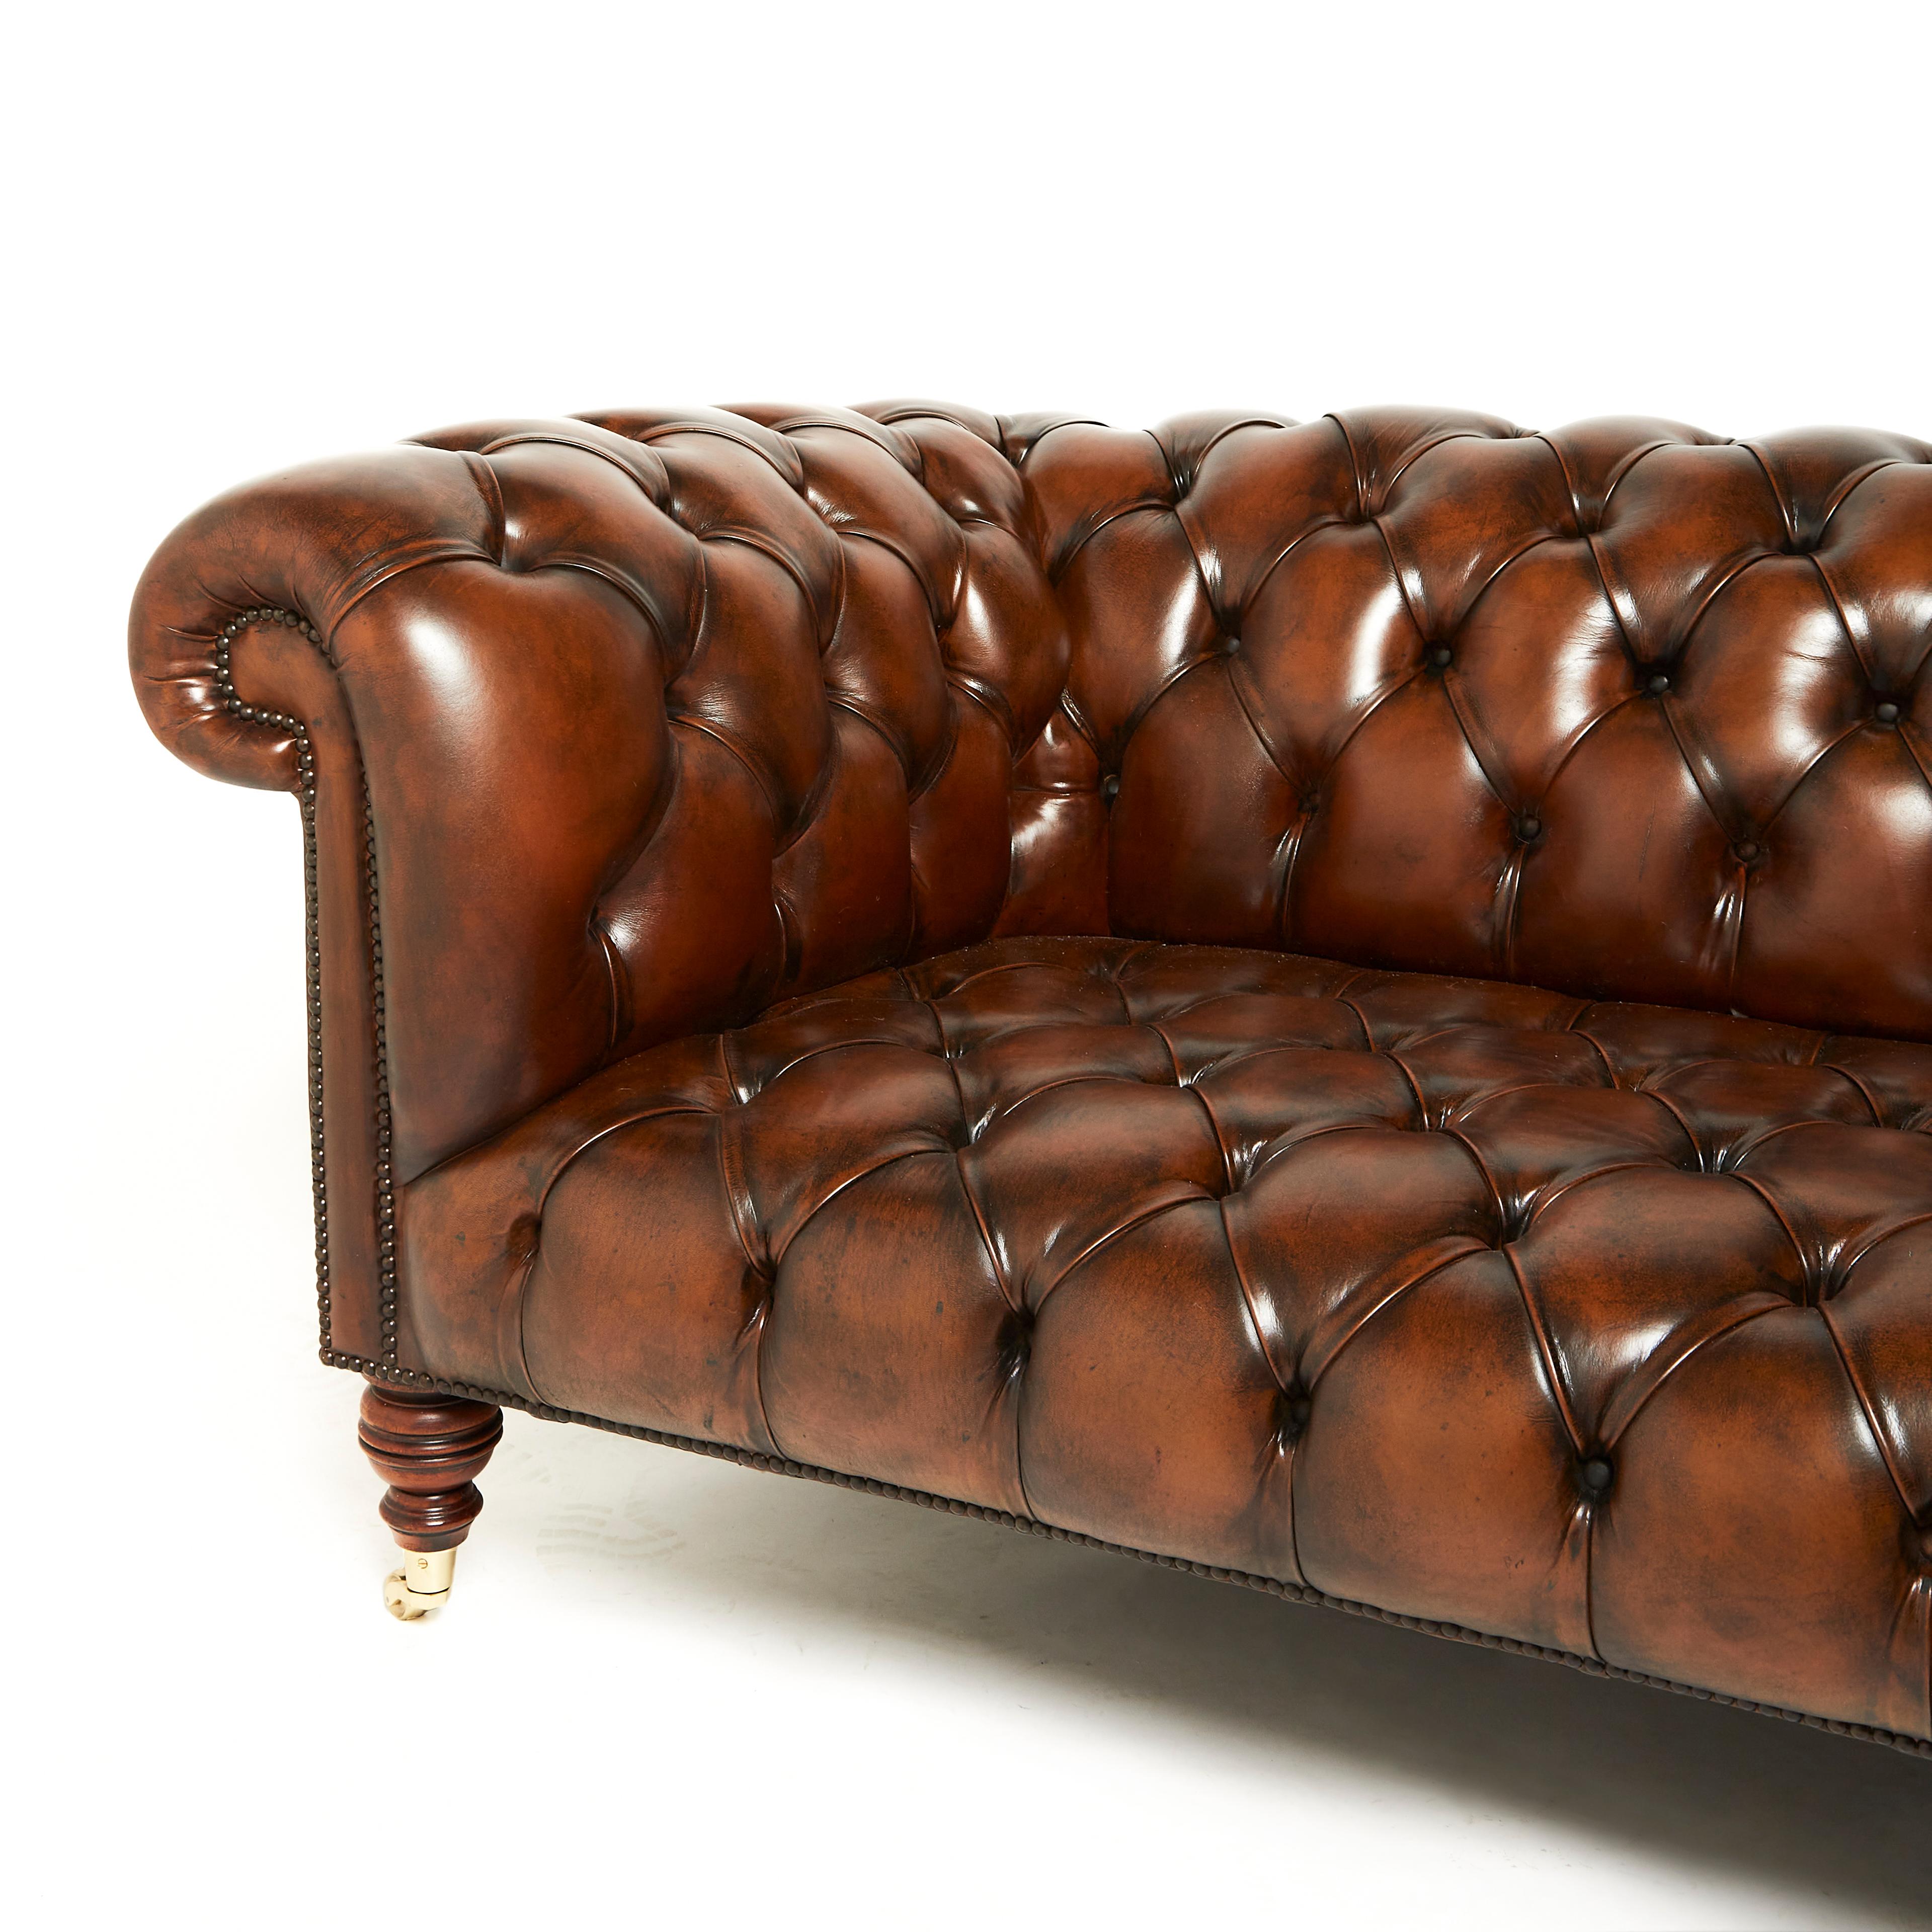 This superb quality and classic styled English chesterfield sofa features deep buttoned leather upholstery with rolled back and arm rests. The sofa is one piece with turned mahogany legs and supported on brass casters. It measures a massive 96